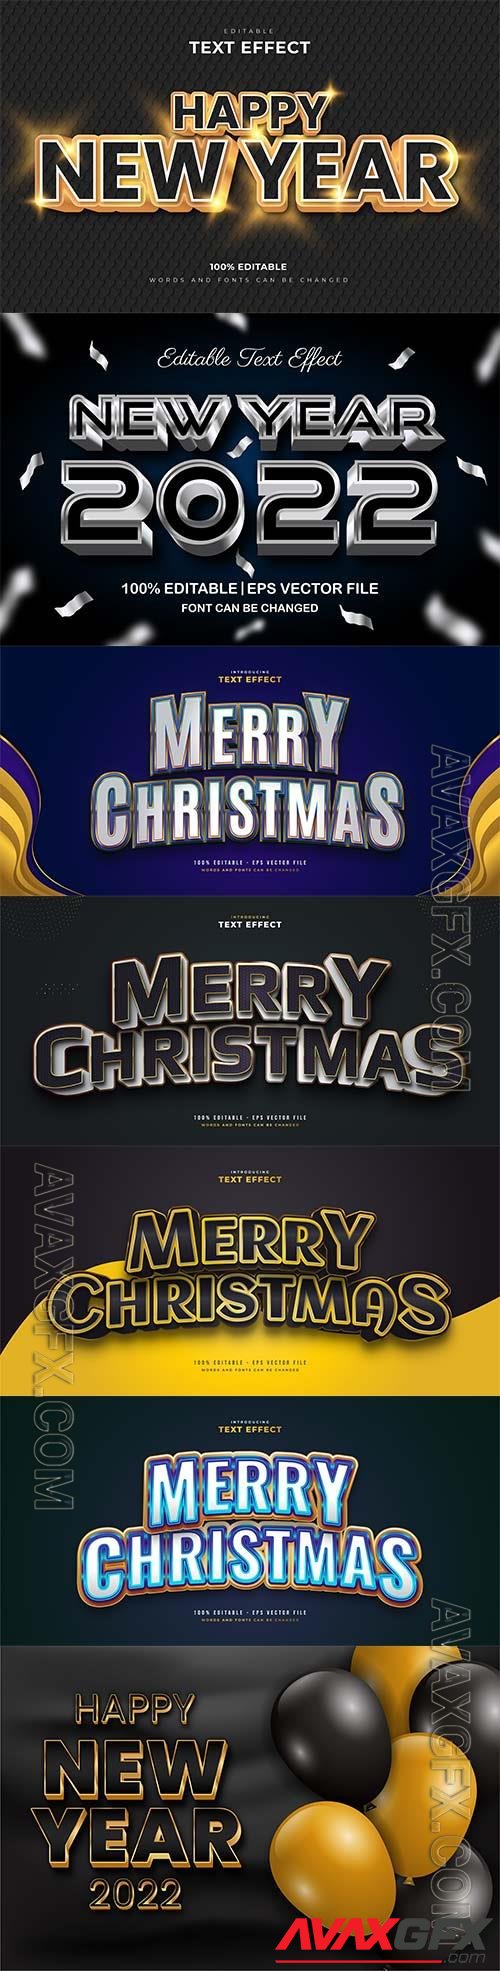 Merry christmas and happy new year 2022 editable vector text effects vol 14